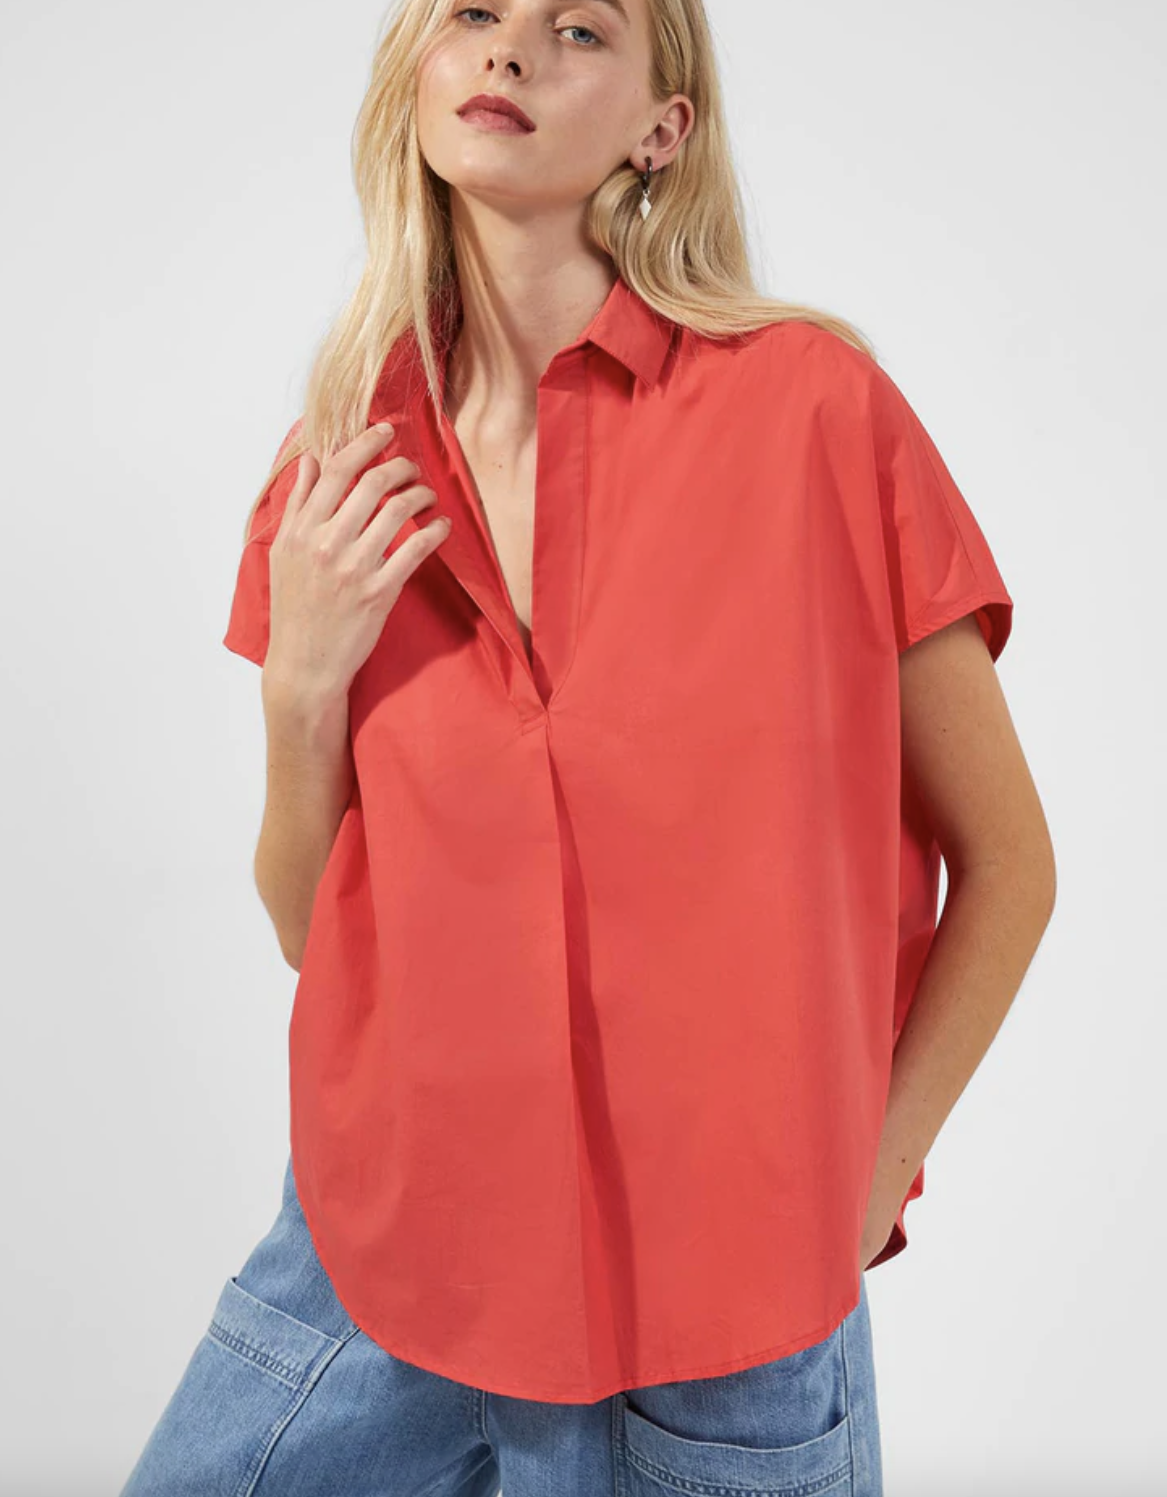 Katey Preston’s Current Favorite Things For Spring blouse for spring colorful spring blouse colorful spring clothing